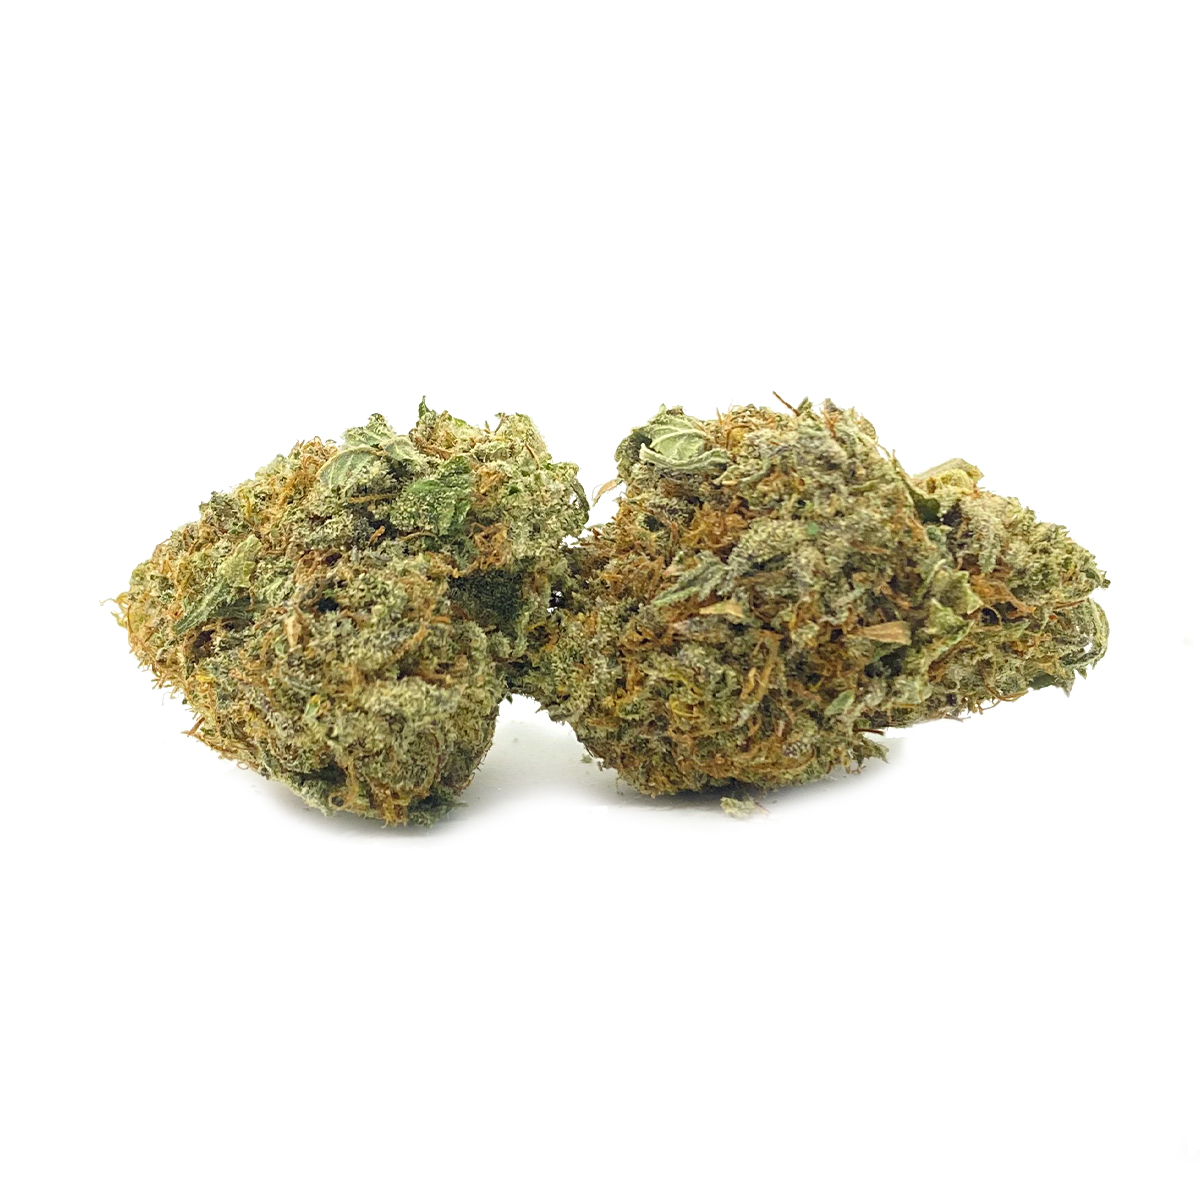 Budget Buds Black Cherry | Buy Weed Online | Dispensary Near Me